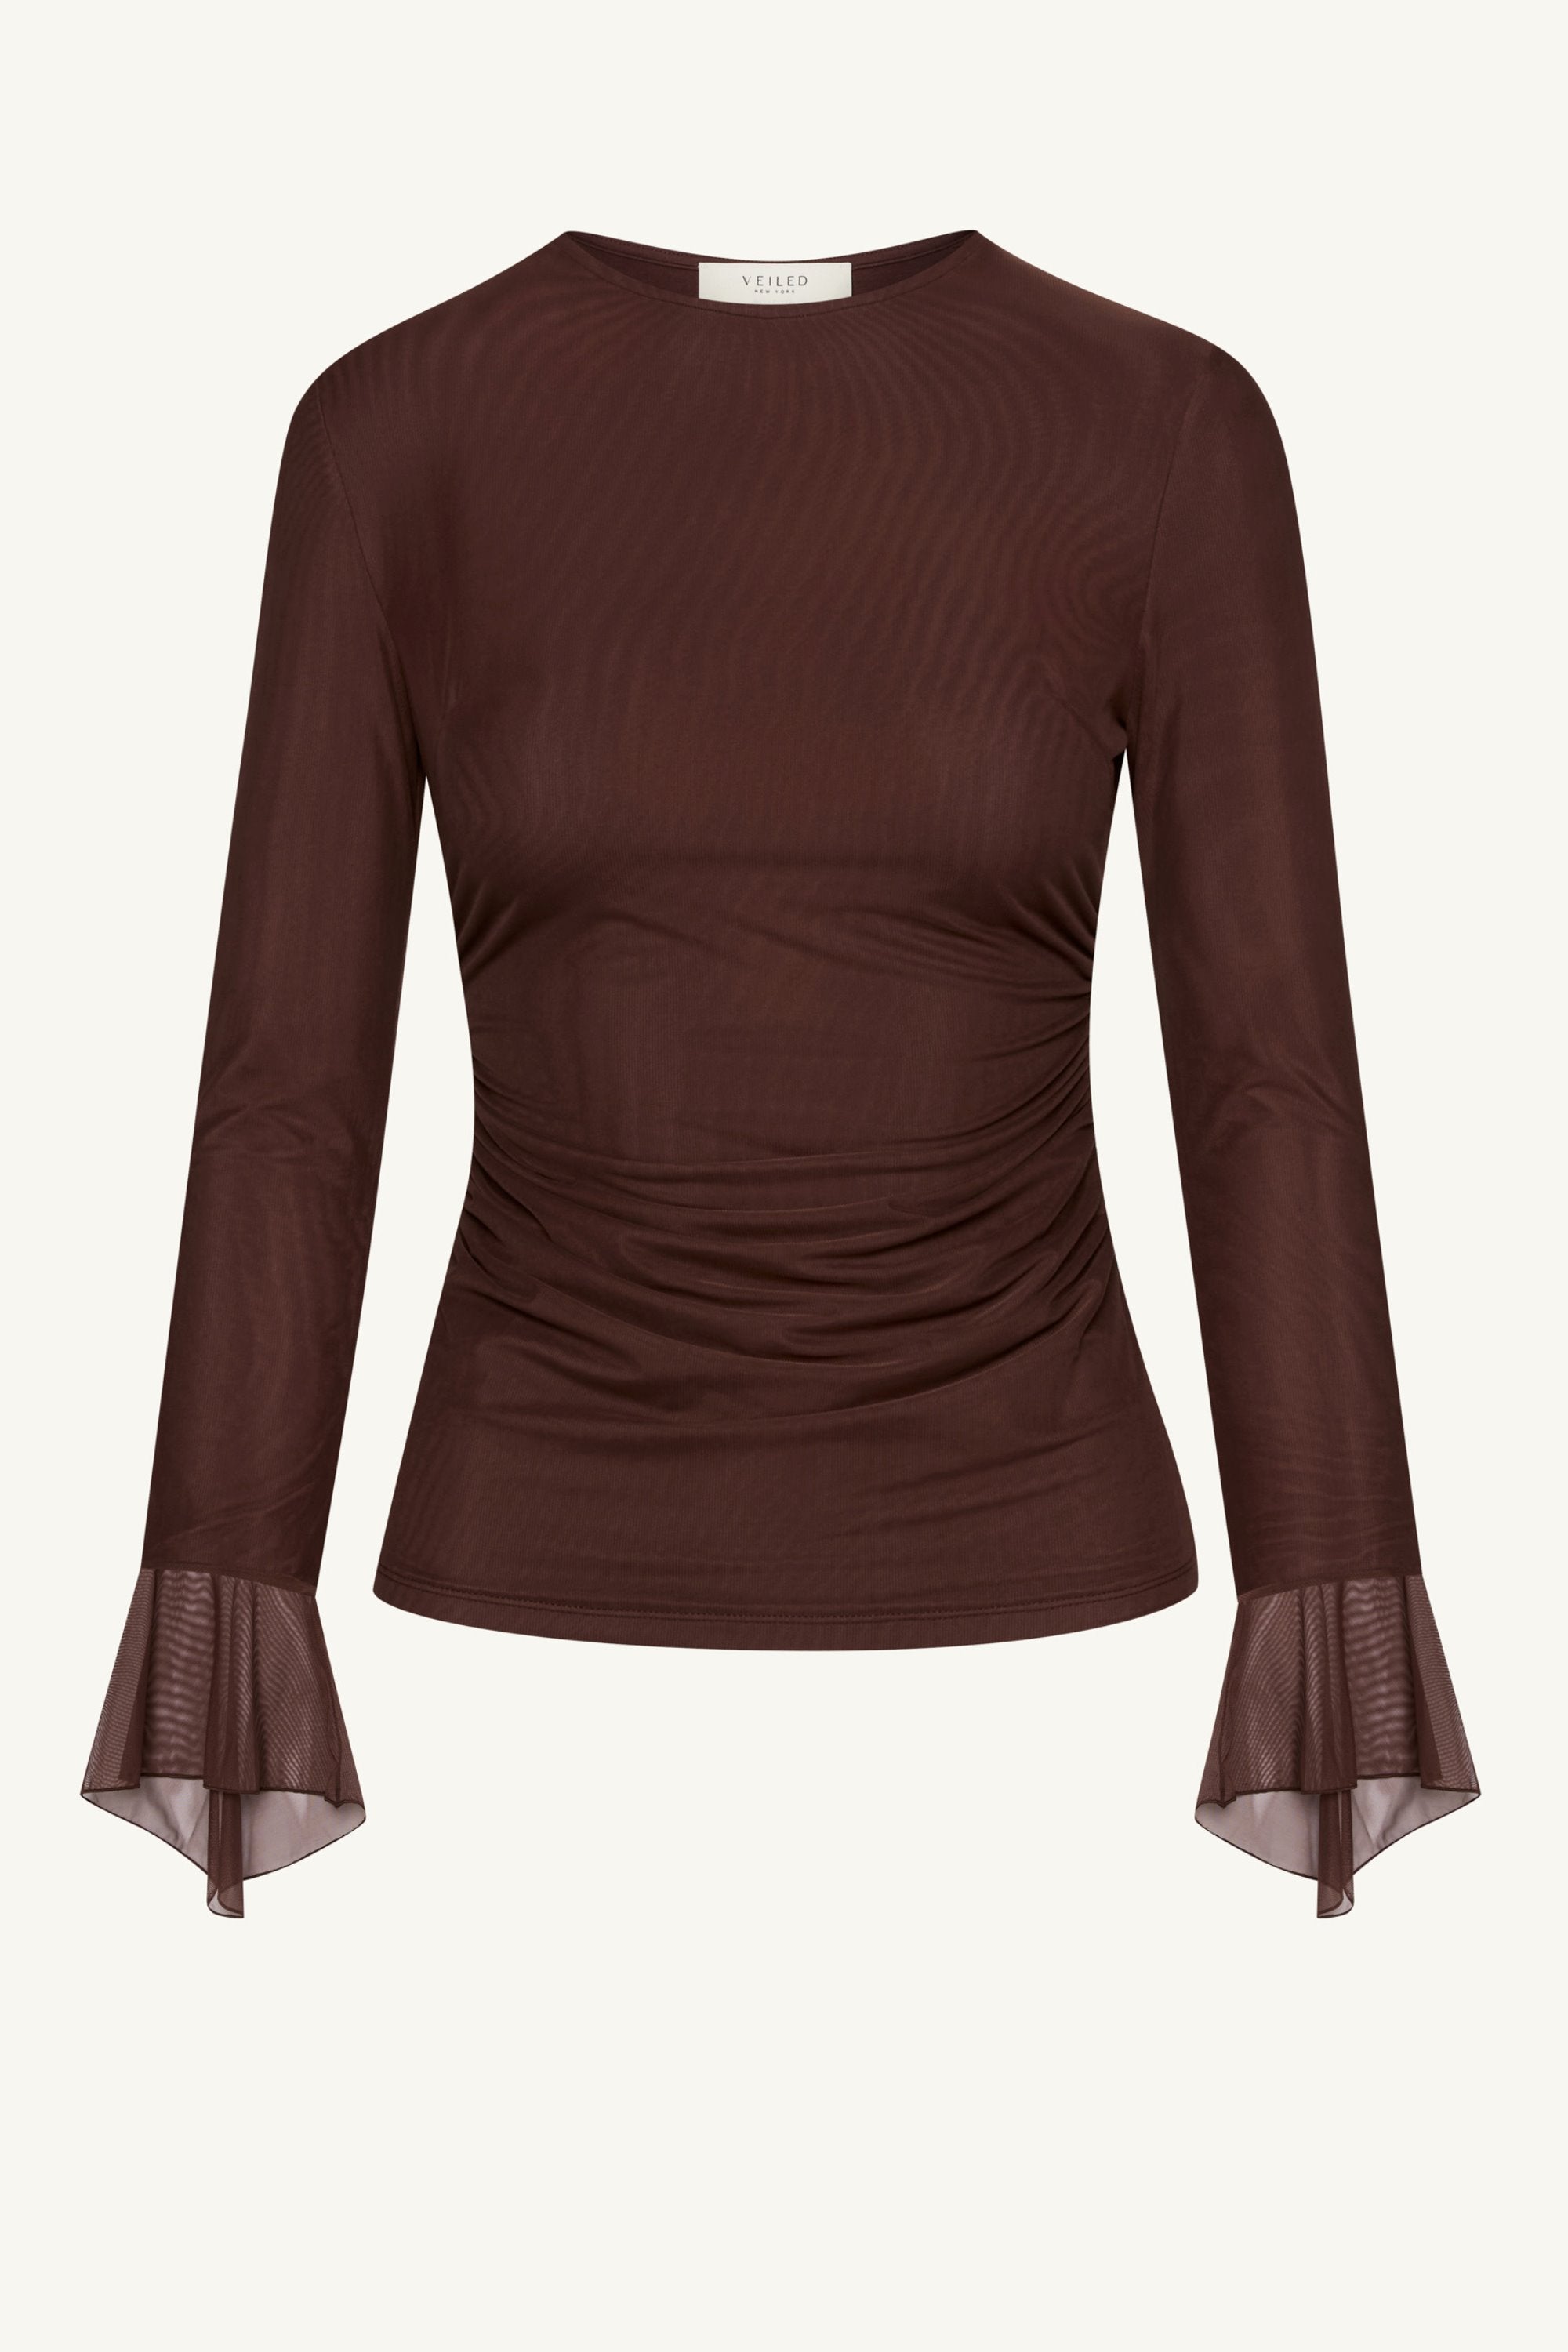 Lolita Rouched Mesh Top - Espresso Clothing Veiled 